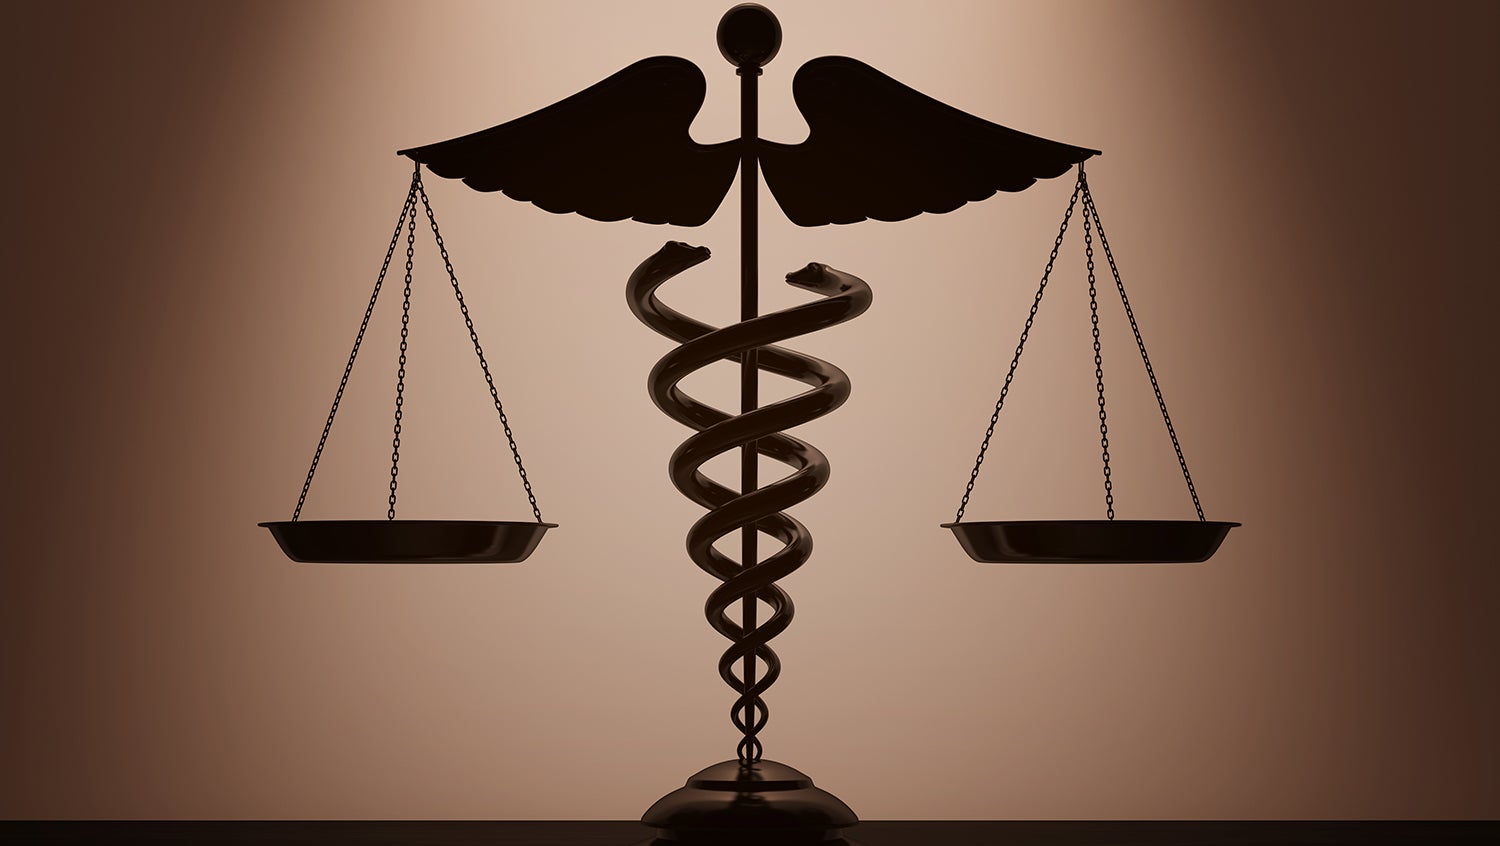 Medical caduceus symbol as justice scales on a brown backdrop